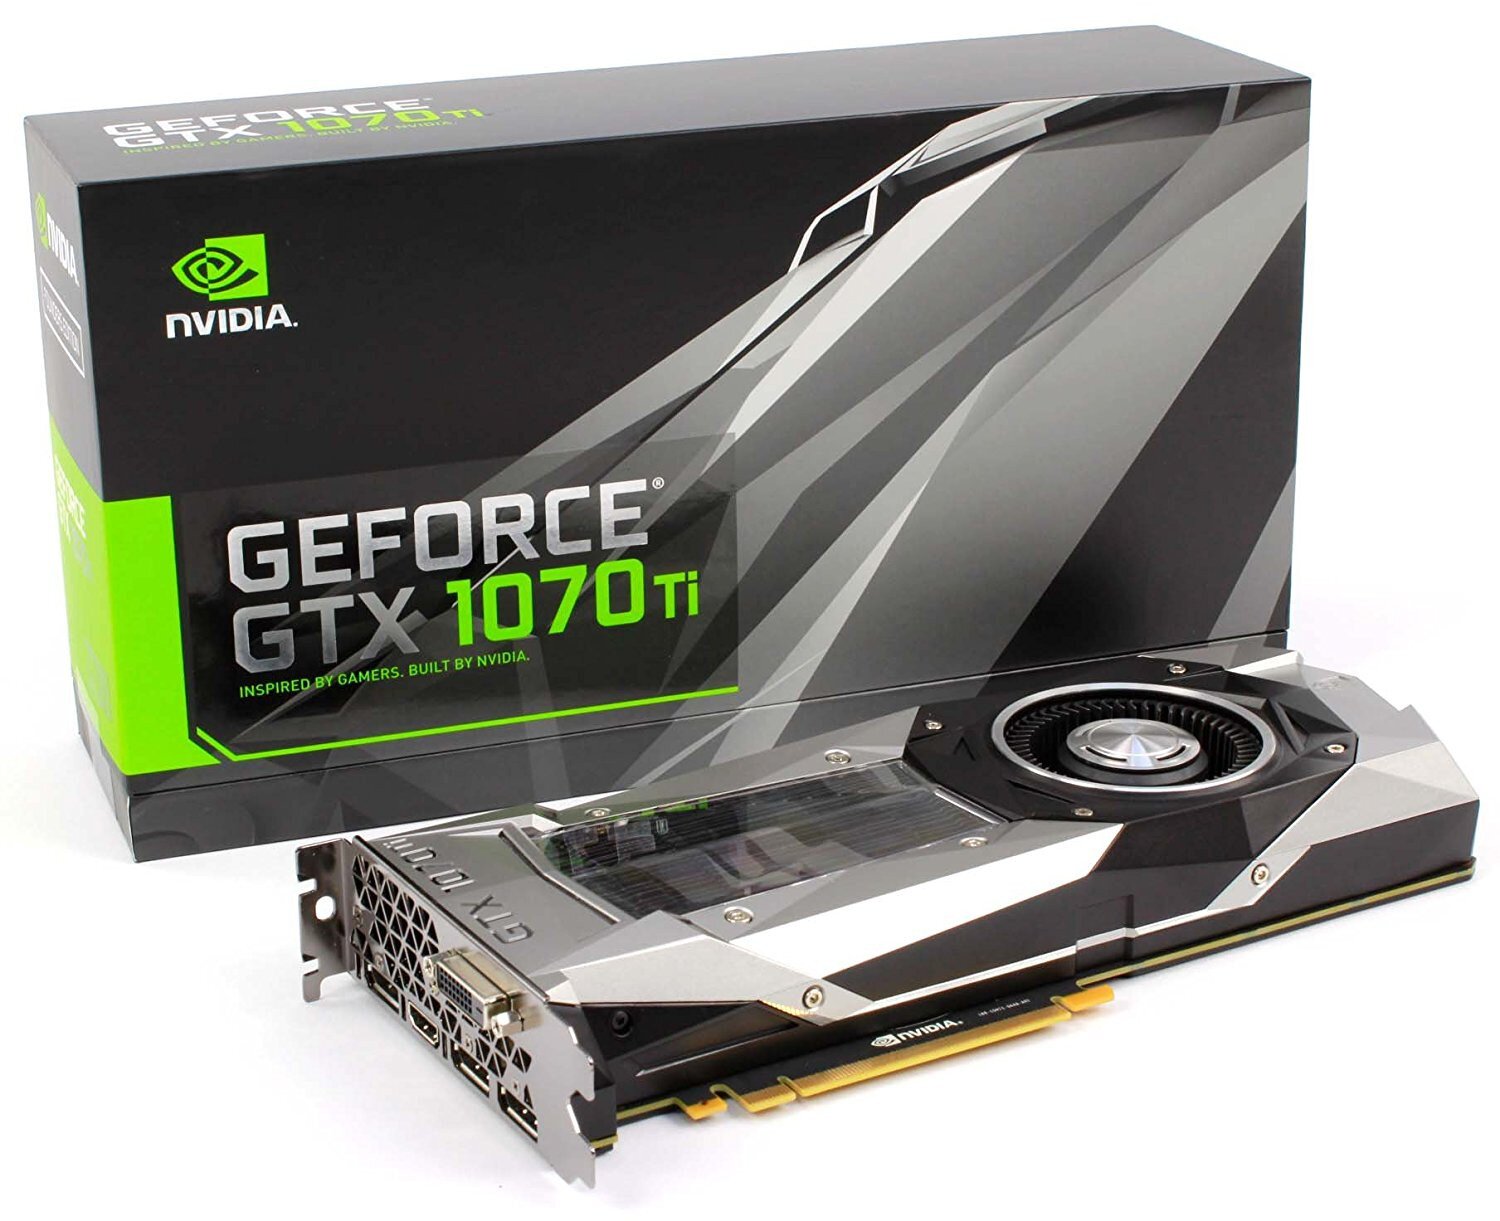 Buy NVIDIA GeForce GTX 1070 Ti Founders Edition online in Pakistan